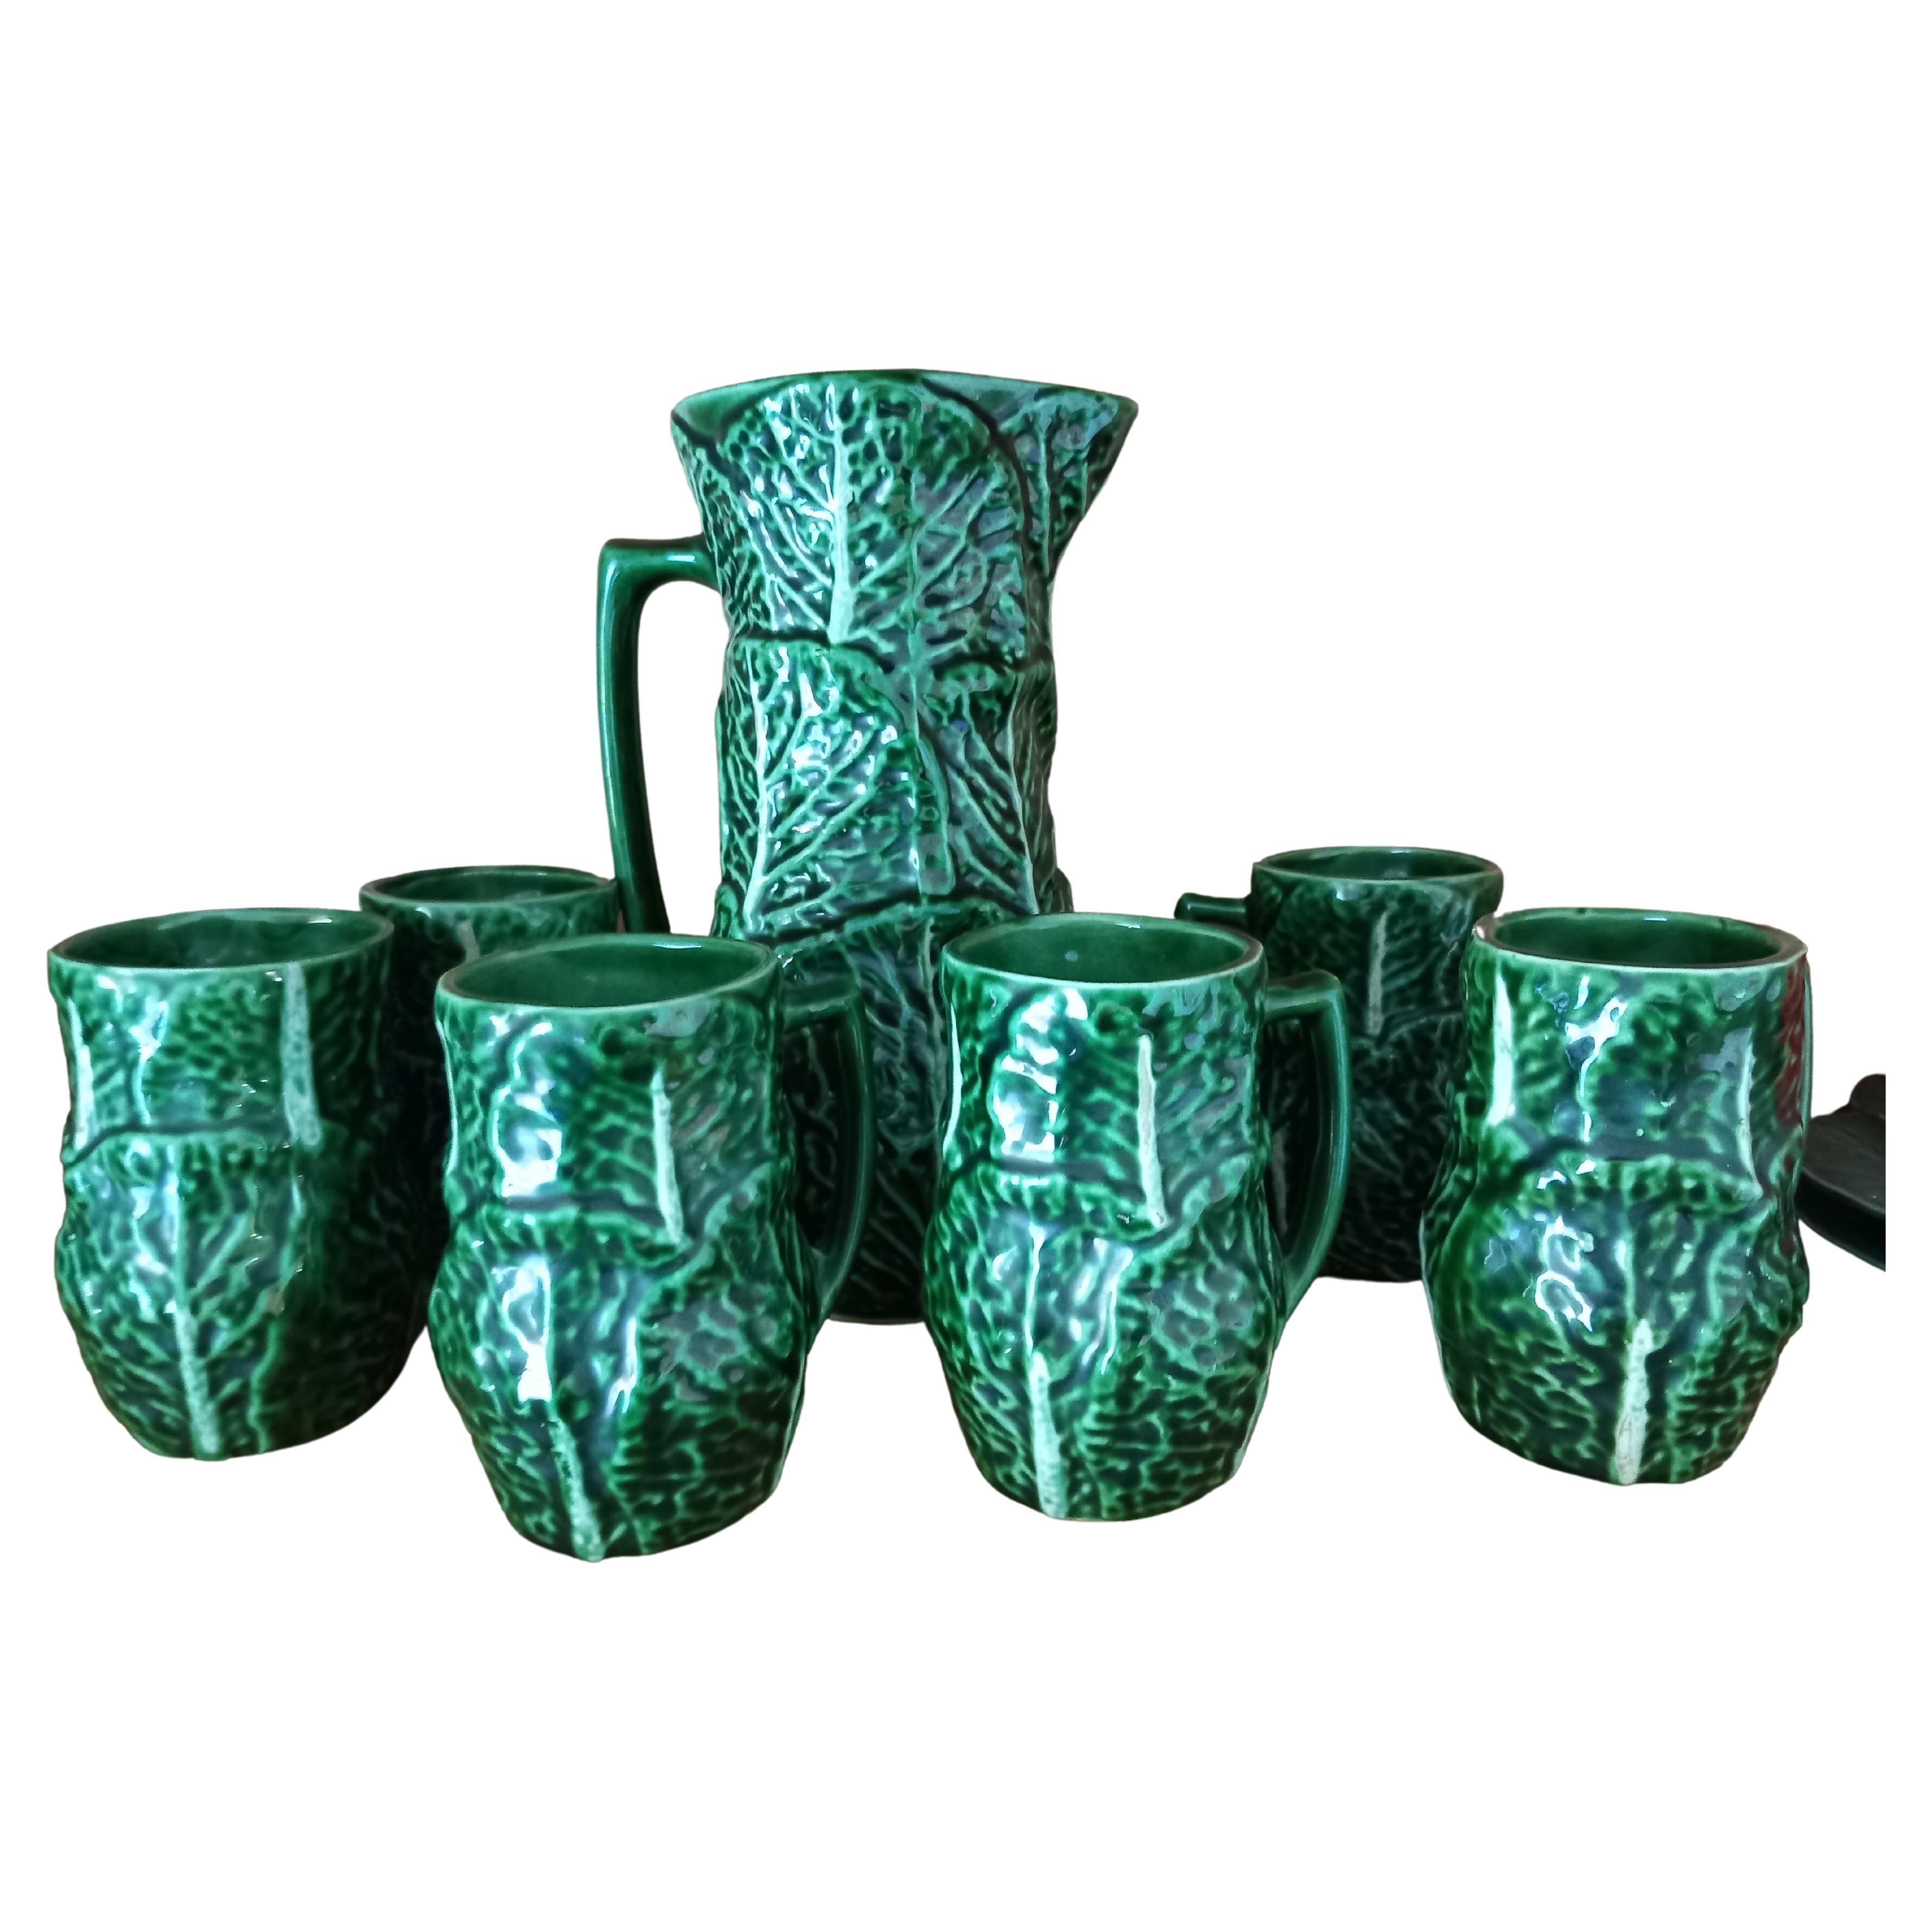 Set Majolica Ceramic Jug and 6 Mug Cups Shape of Cabbage(Price is for the set) For Sale